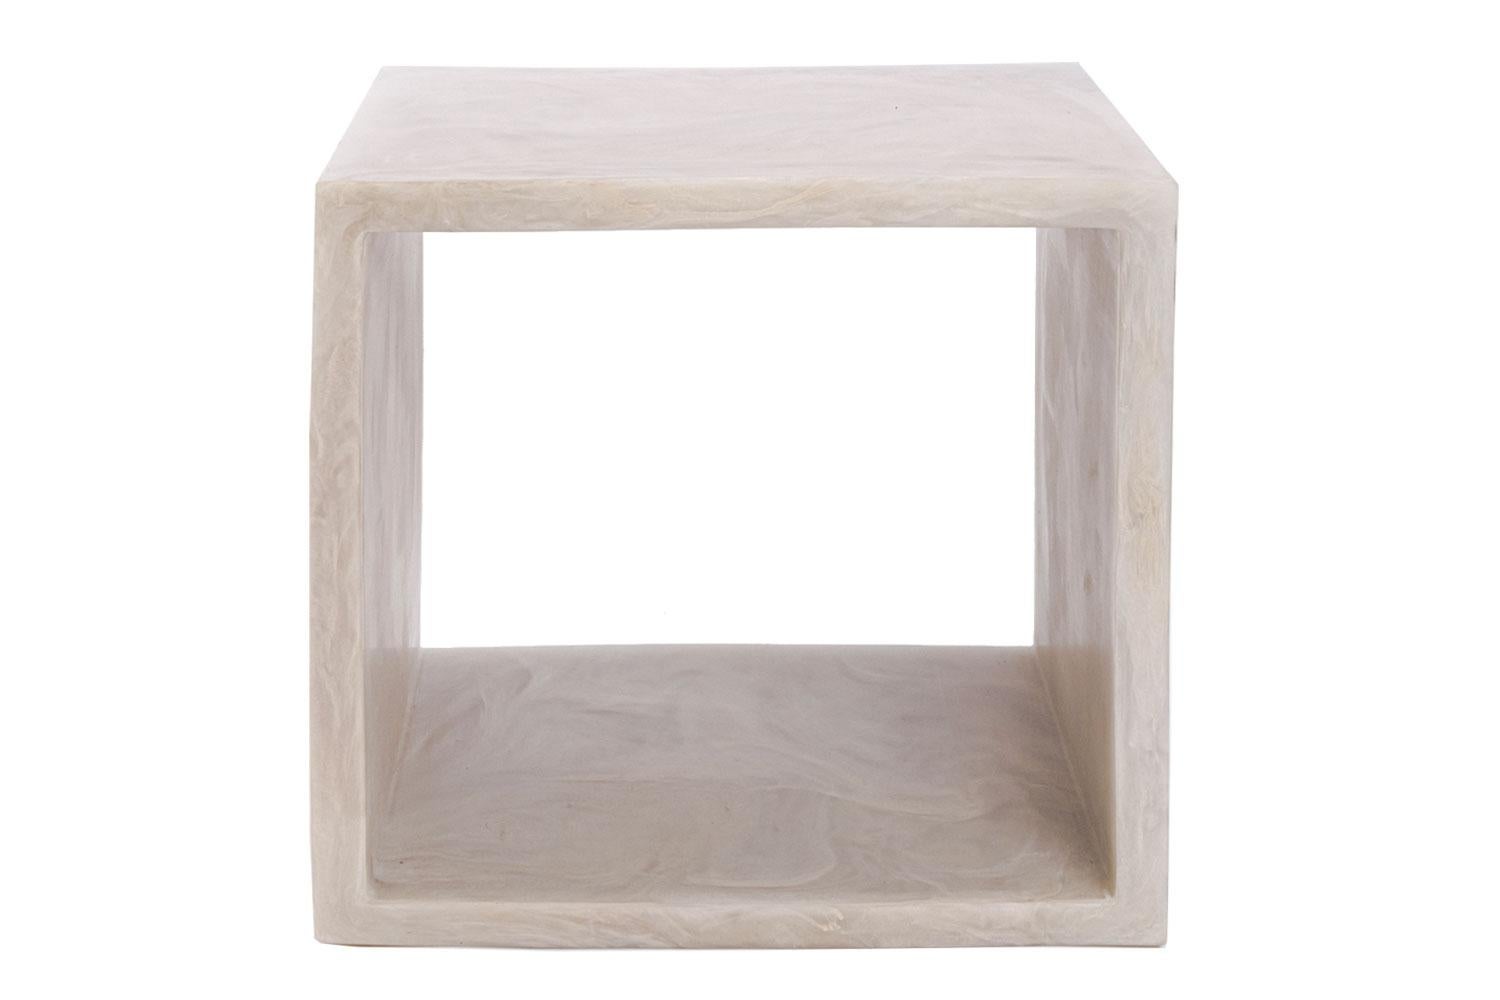 Chief resin table by Martha Sturdy

This 24” open cube works wonderfully as a side table or end table with storage or display below.

Artist, Martha Sturdy was born in 1942 in Vancouver, British Columbia, where she has spent the extent of her